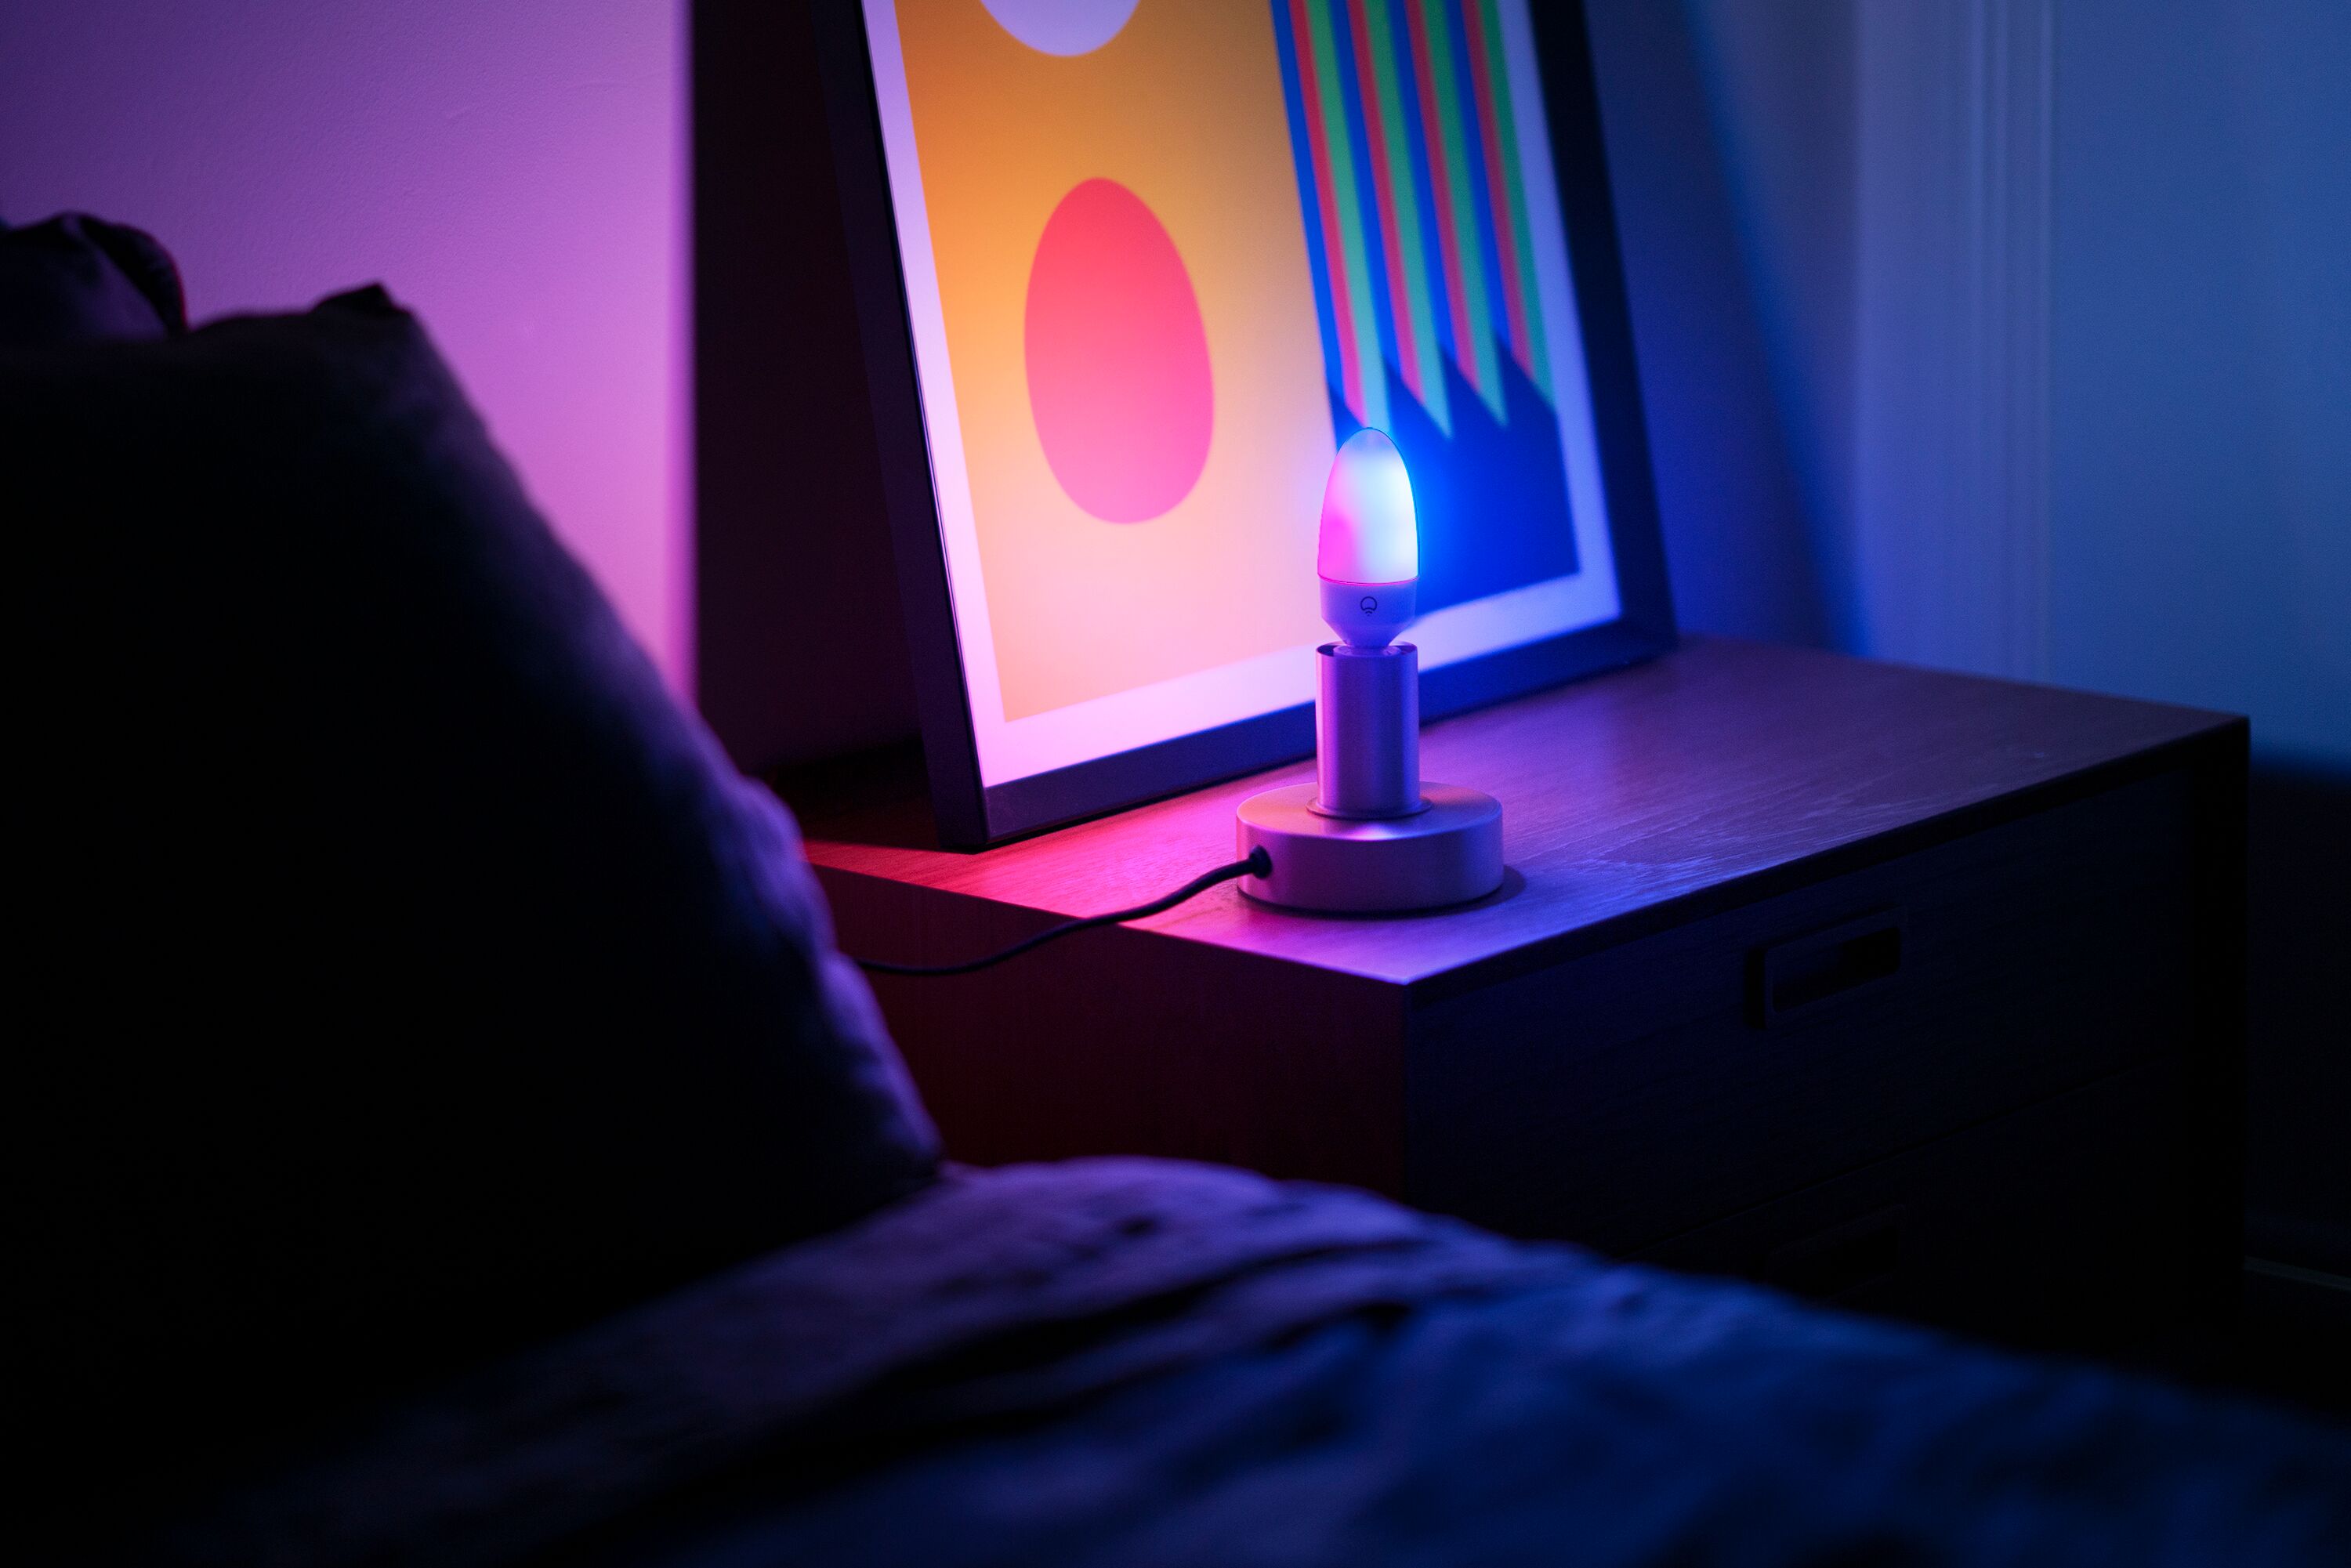 LIfx Uses Polychrome Technology to Create Unique Effects | Digital Trends